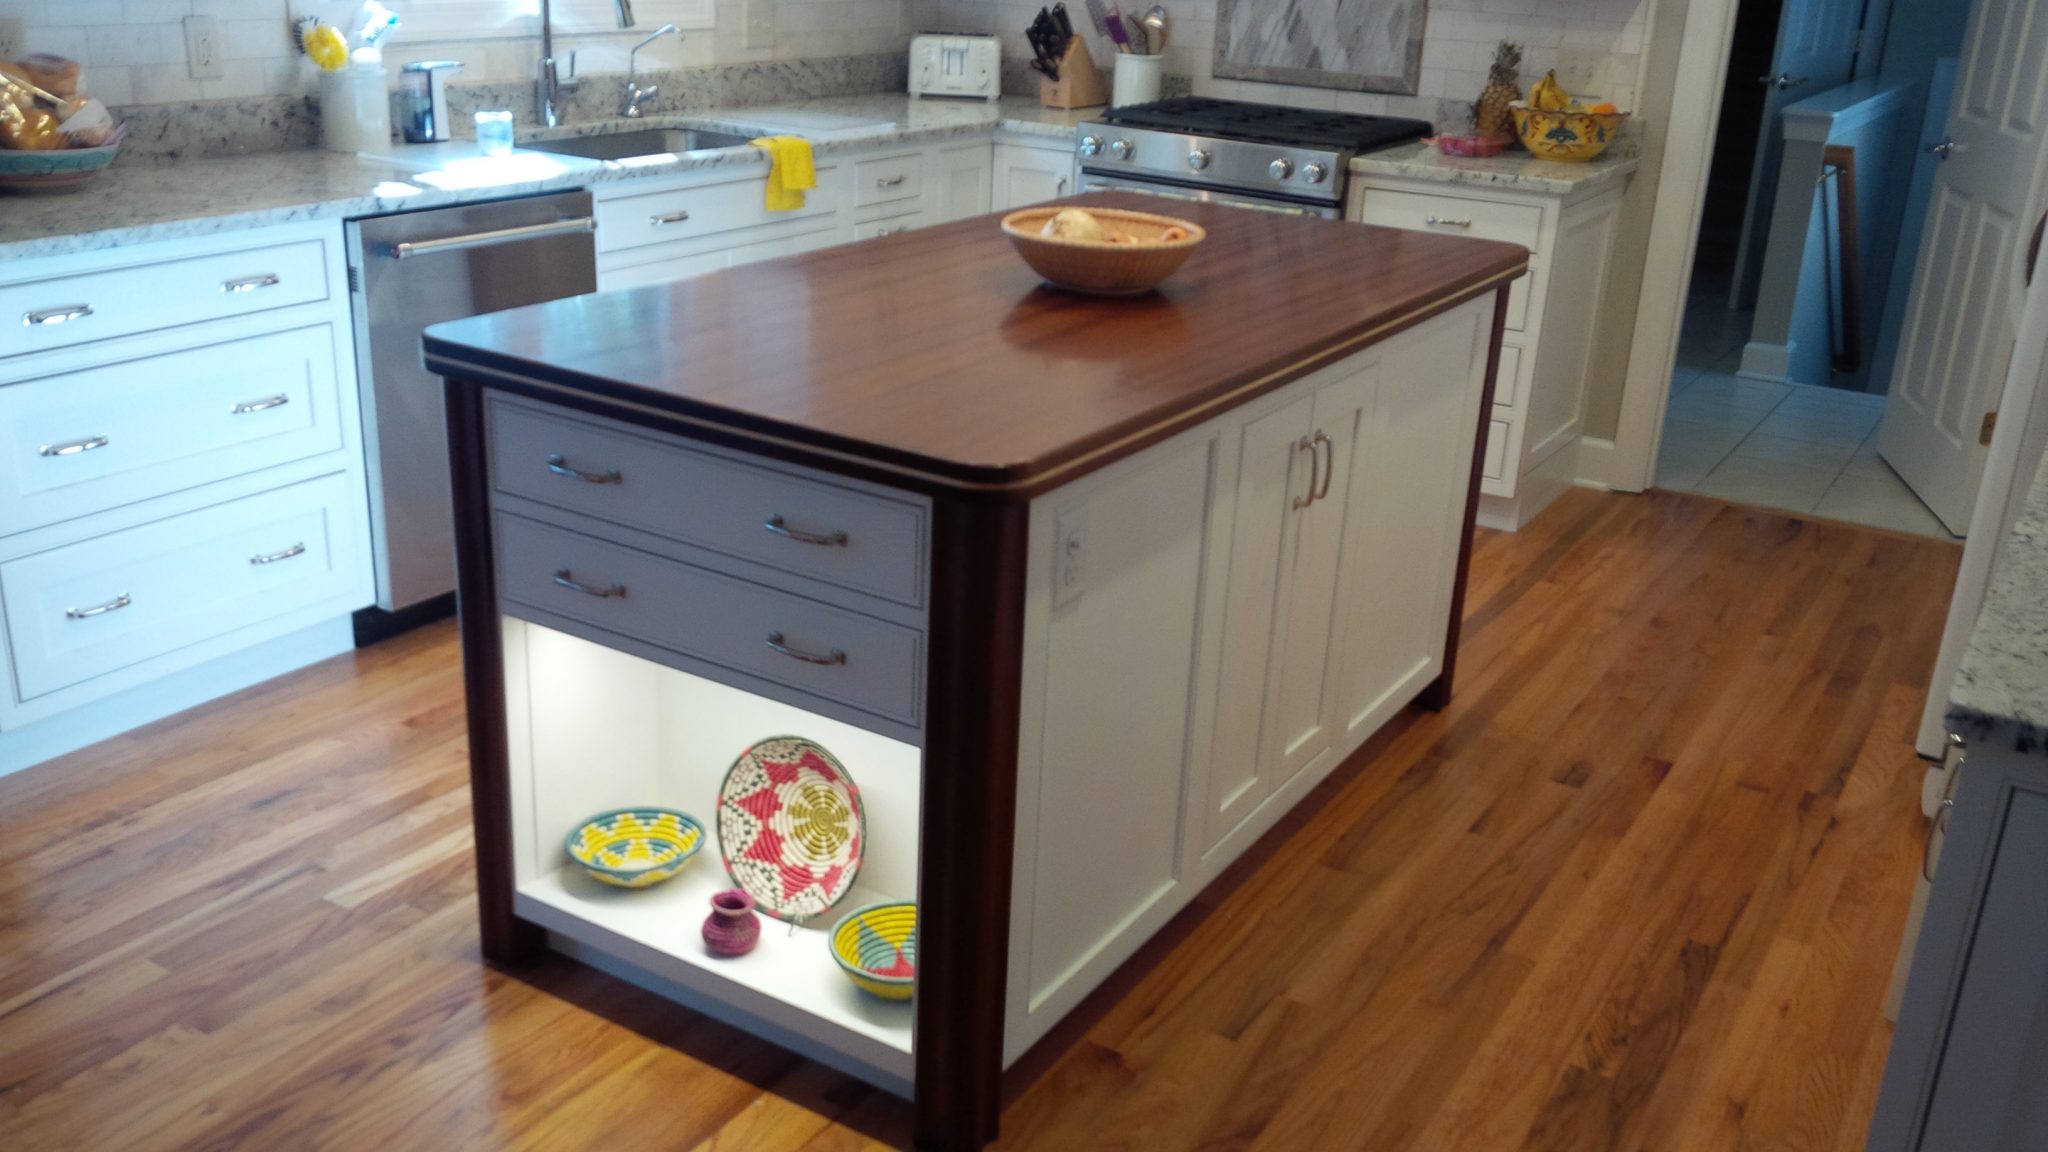 Kitchen Island (7' x 3') is constructed of a Sapele Top, Mahogany Legs and Plywood and Cherry Cabinetry